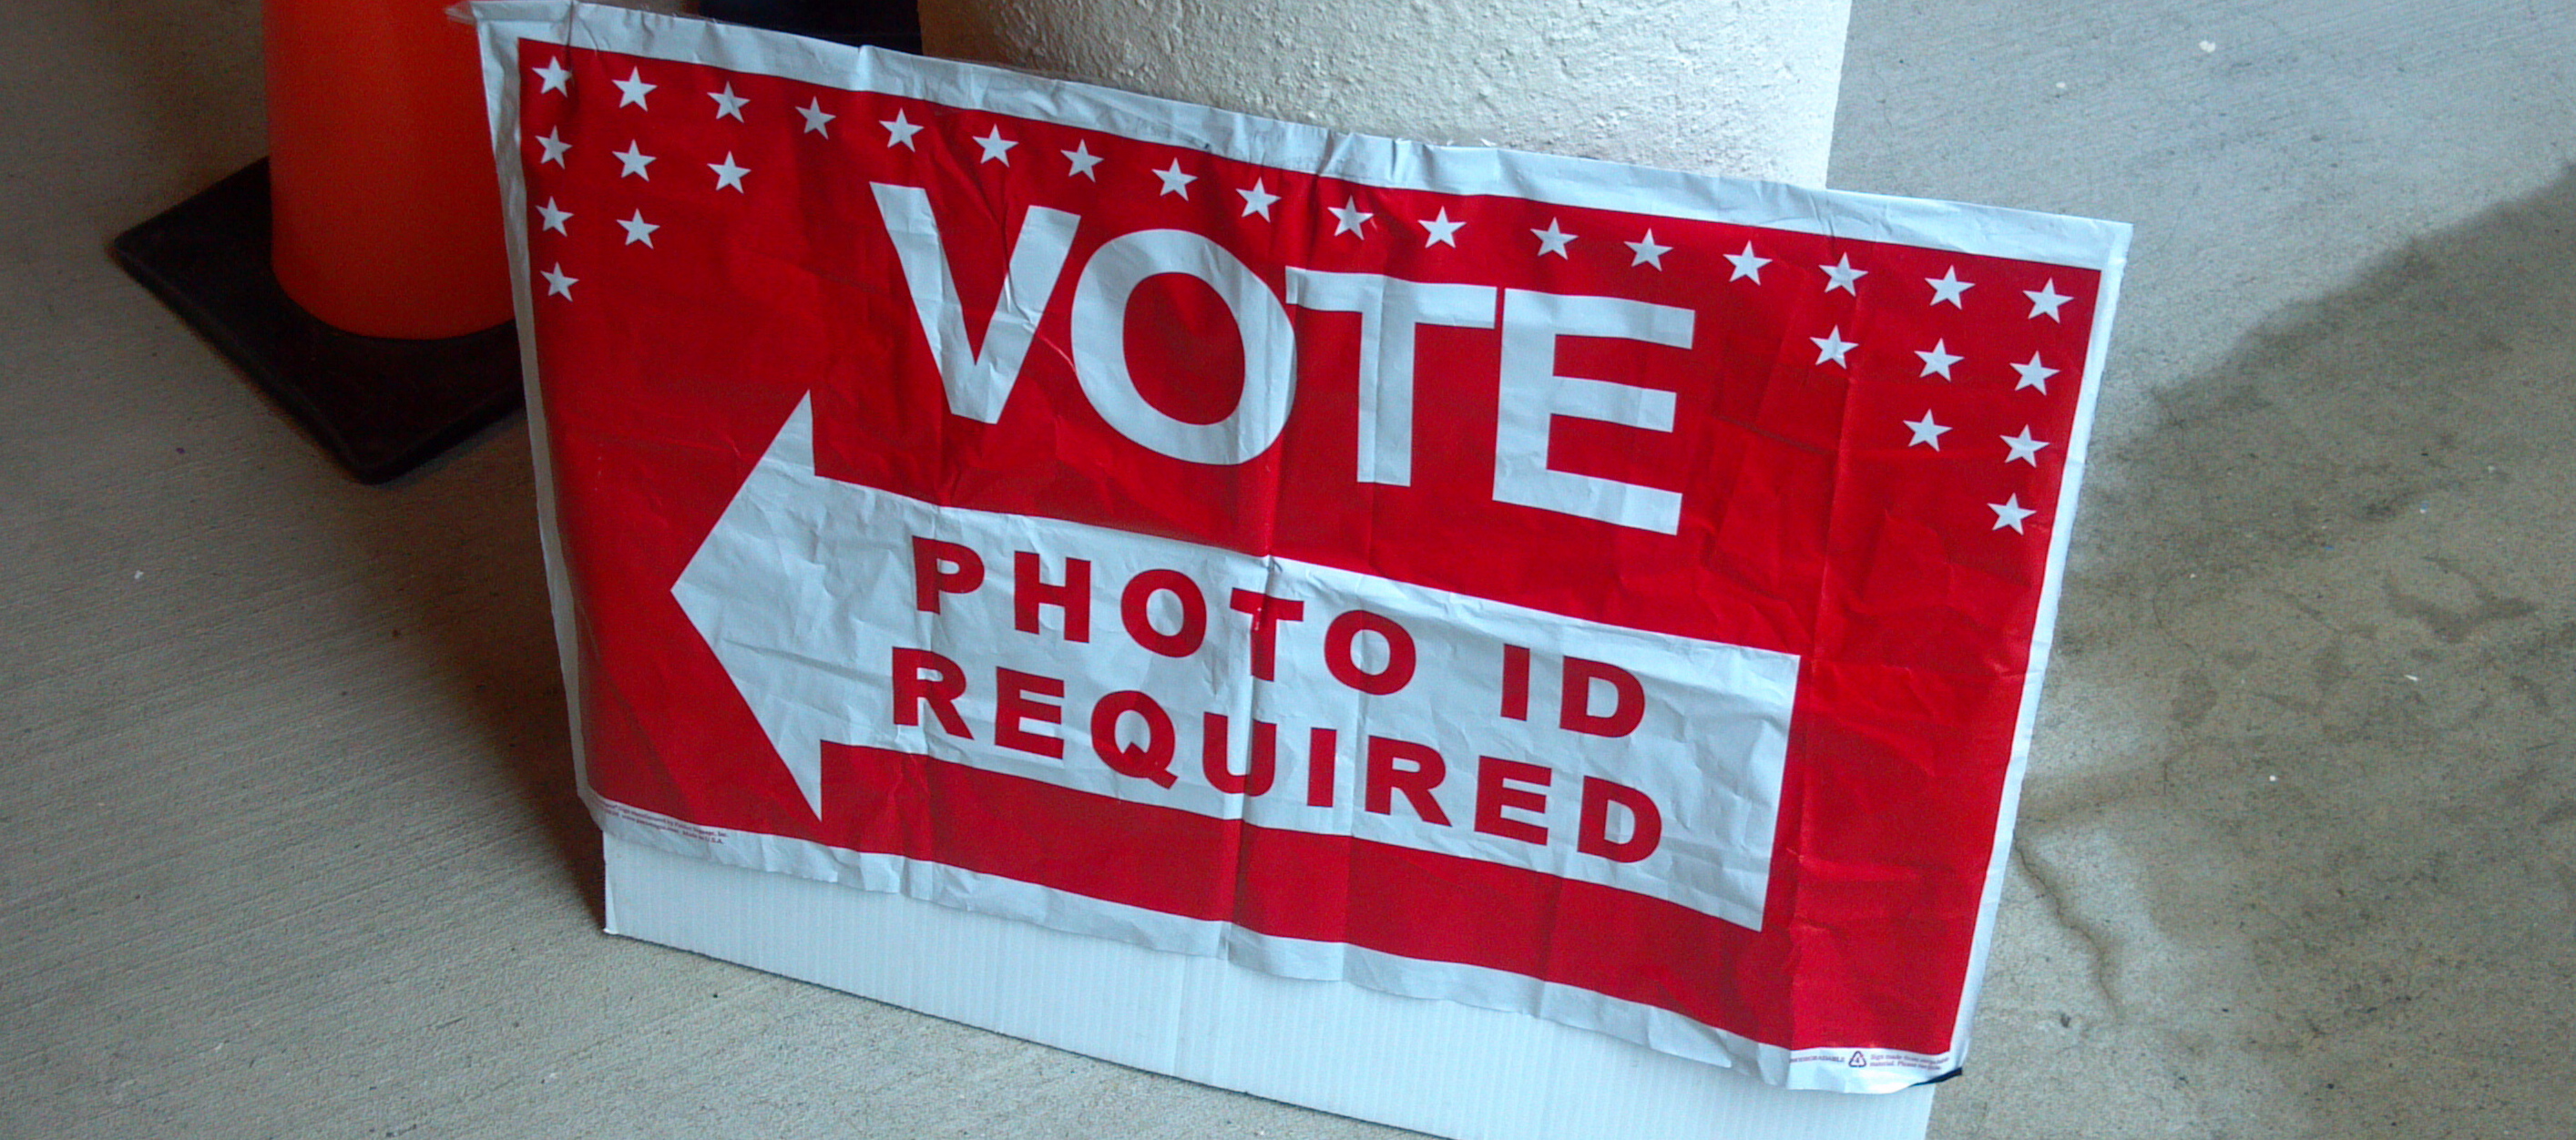 What is the voter ID law in Texas?